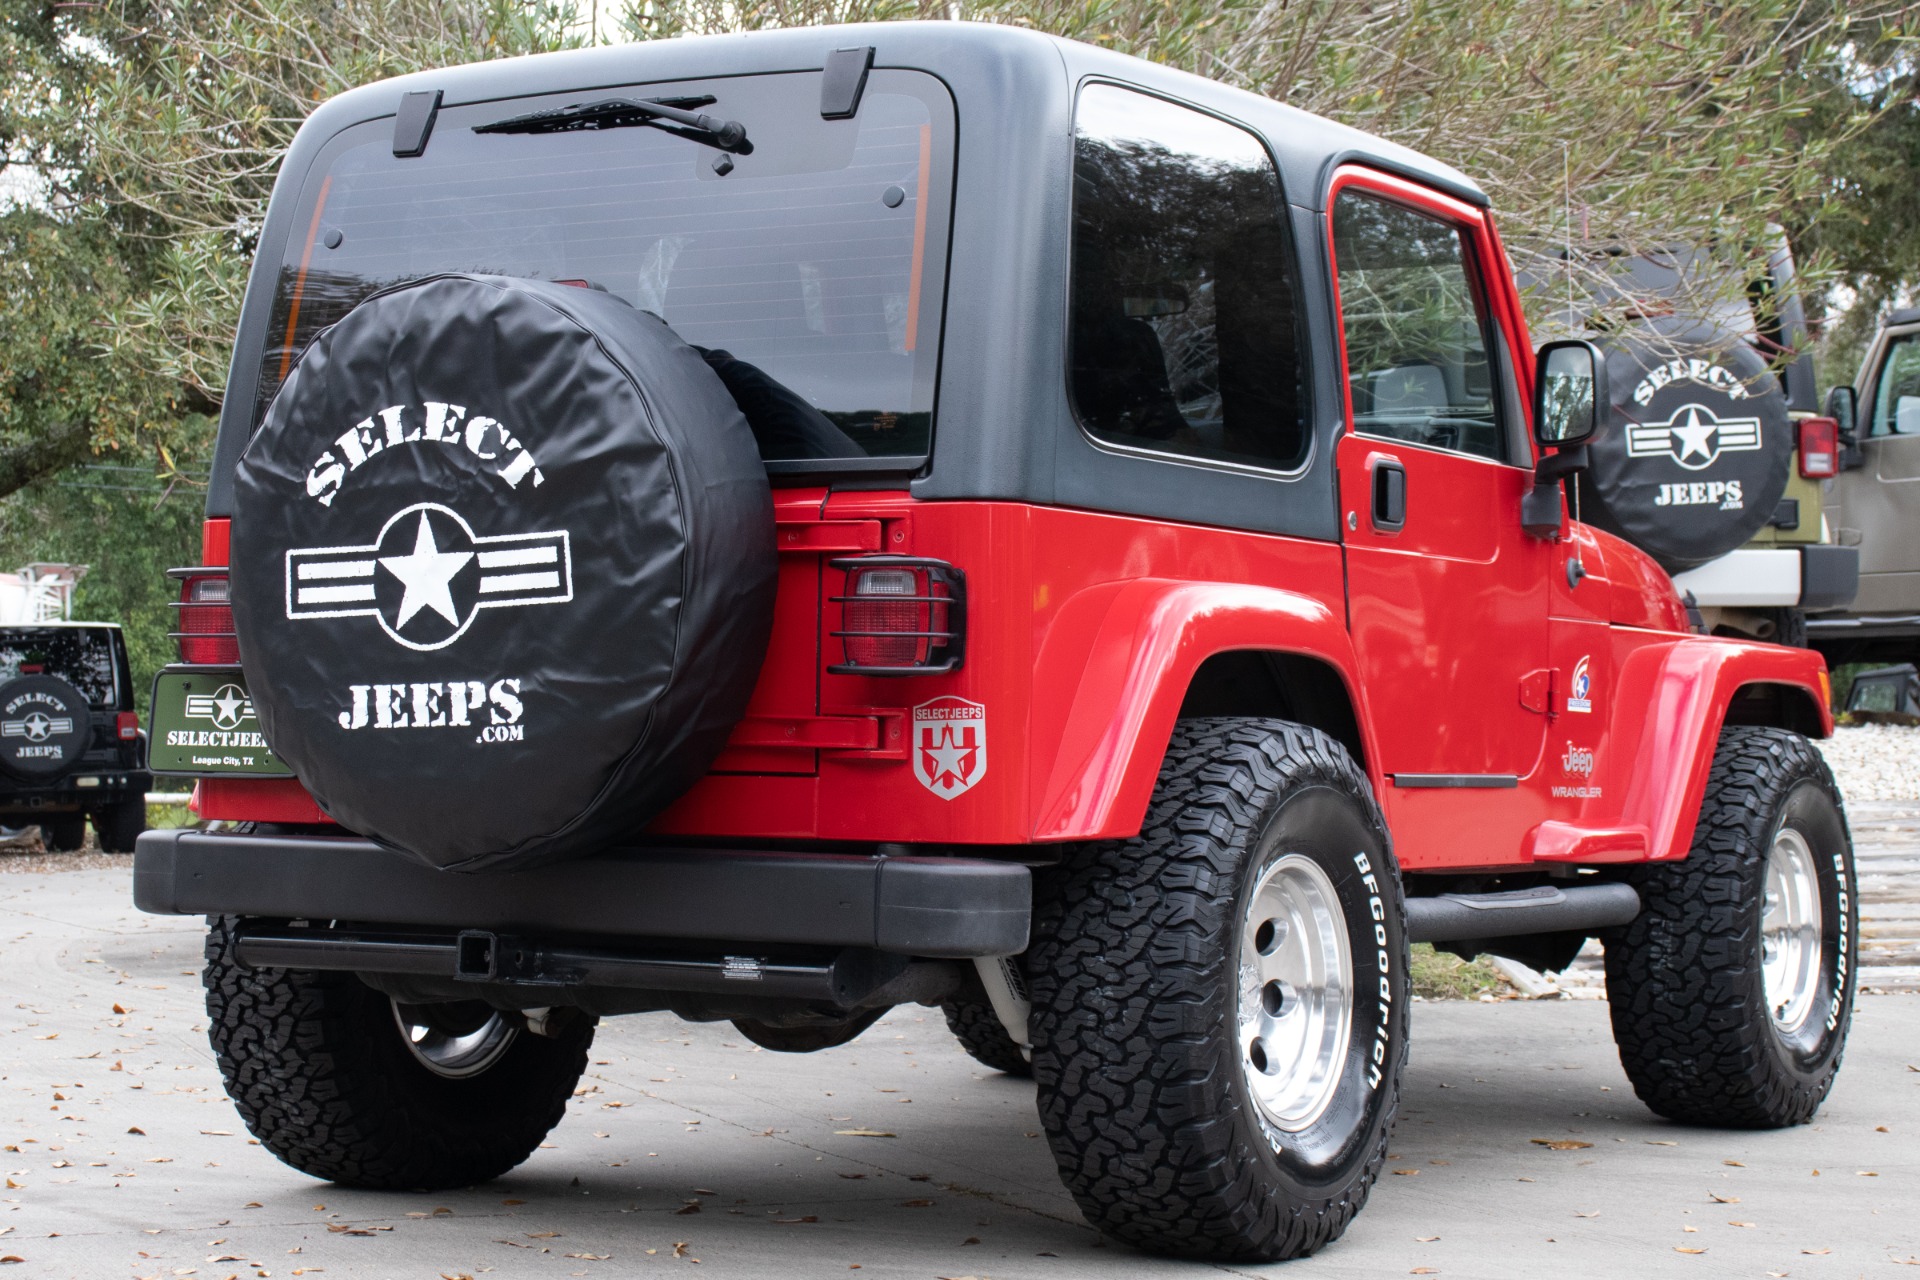 Used 2003 Jeep Wrangler Freedom Edition For Sale ($23,995) | Select Jeeps  Inc. Stock #364709